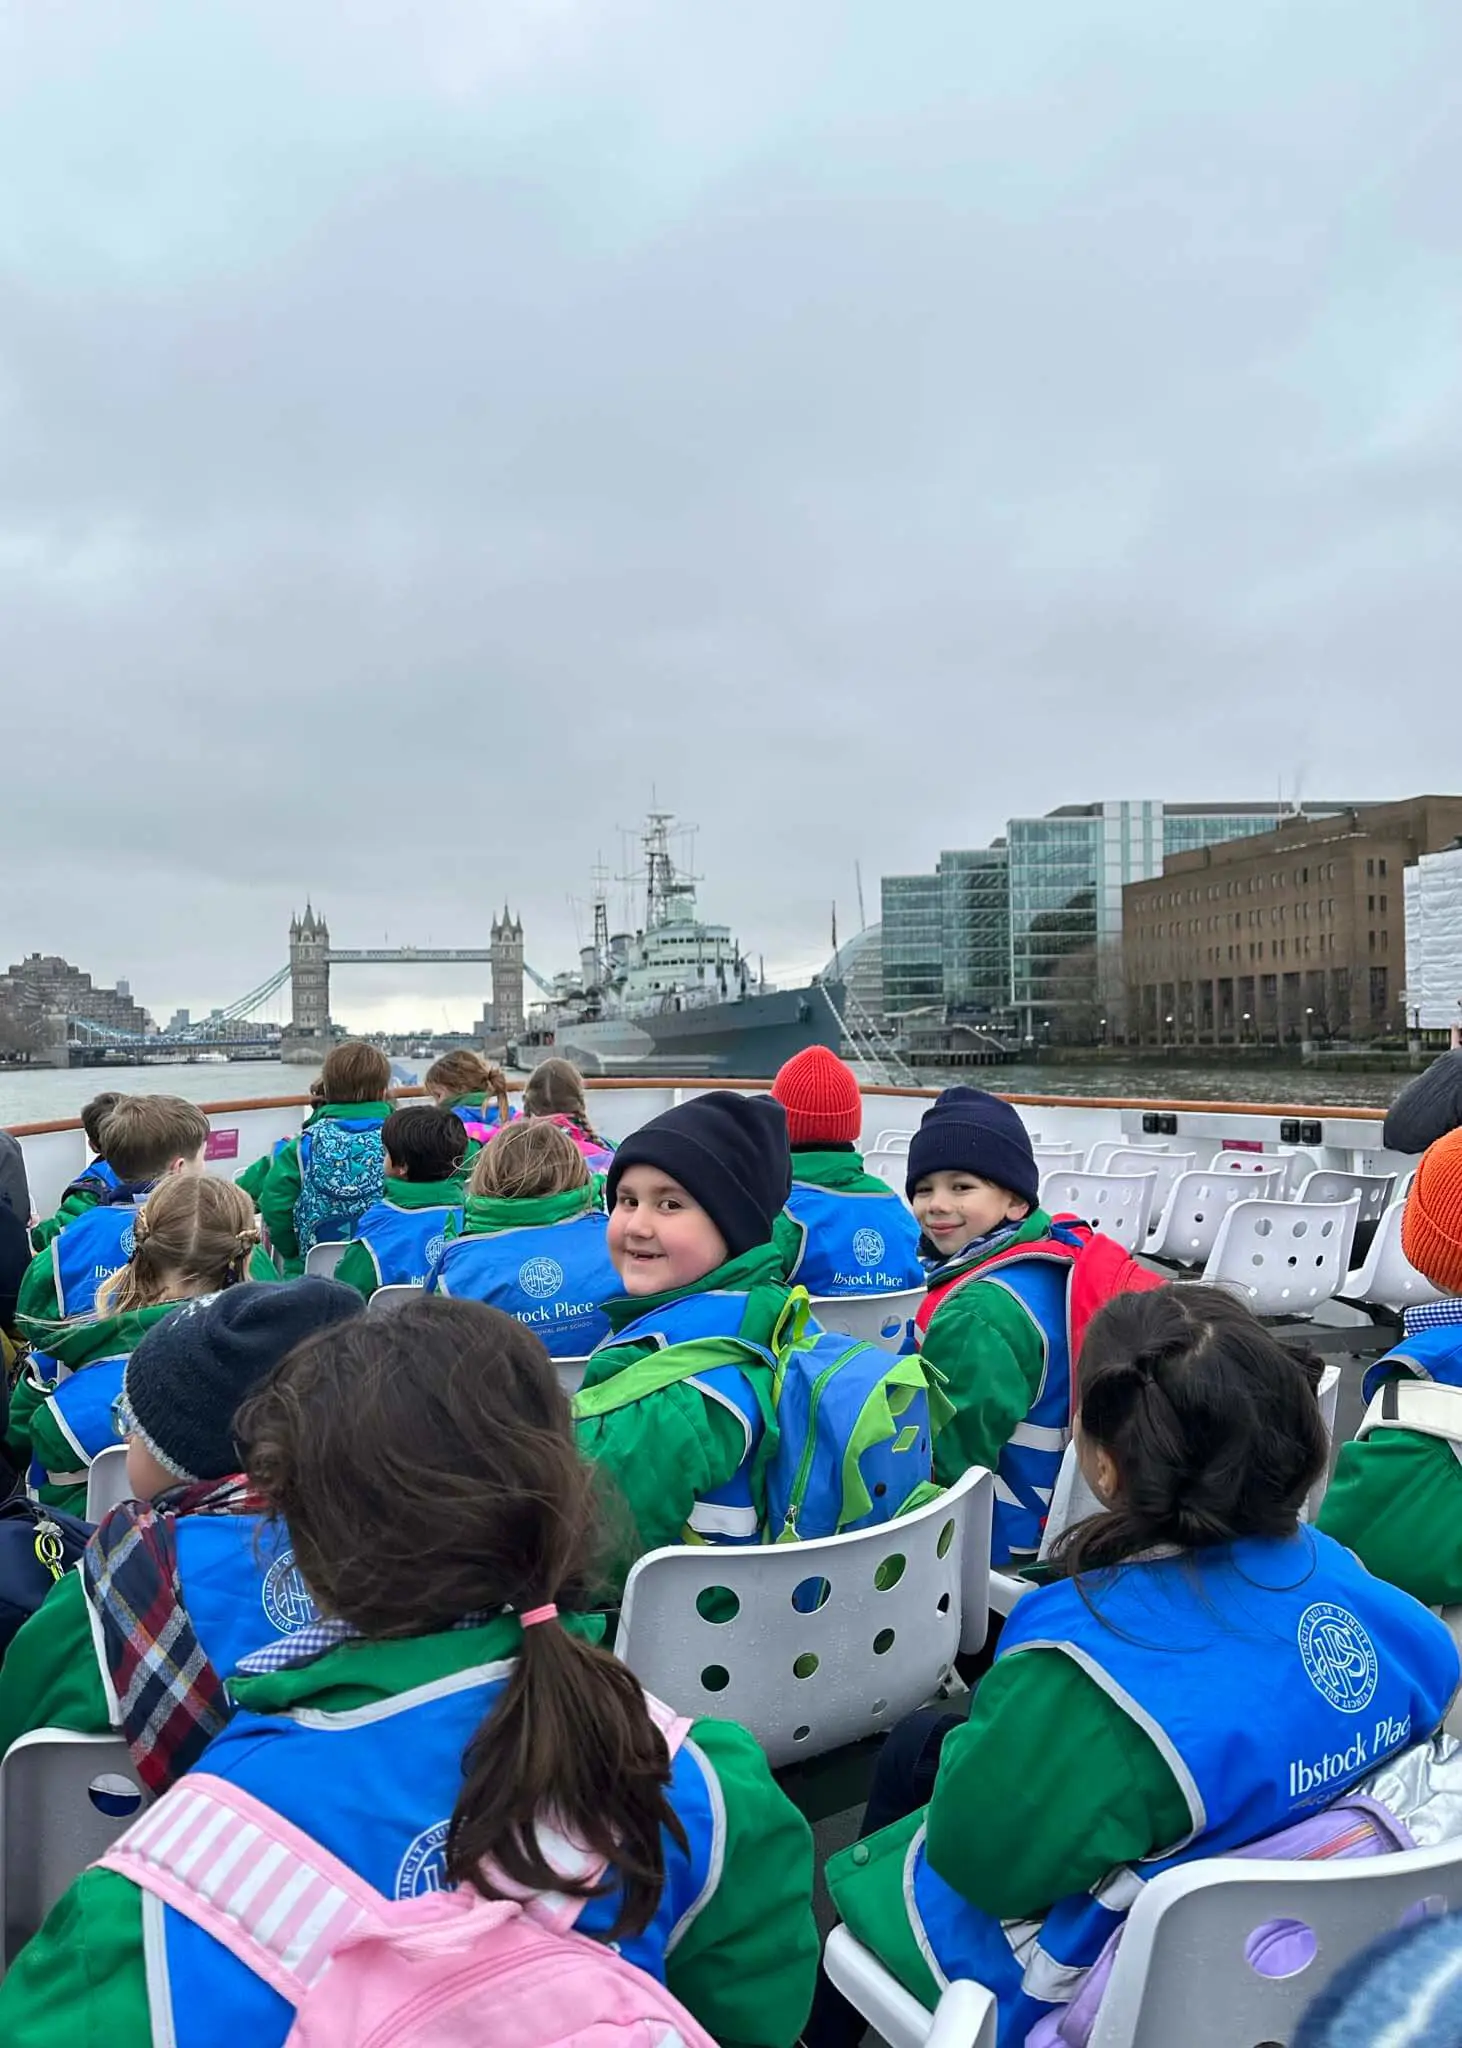 Our Prep 1 pupils spent a day in central London to see the big city.